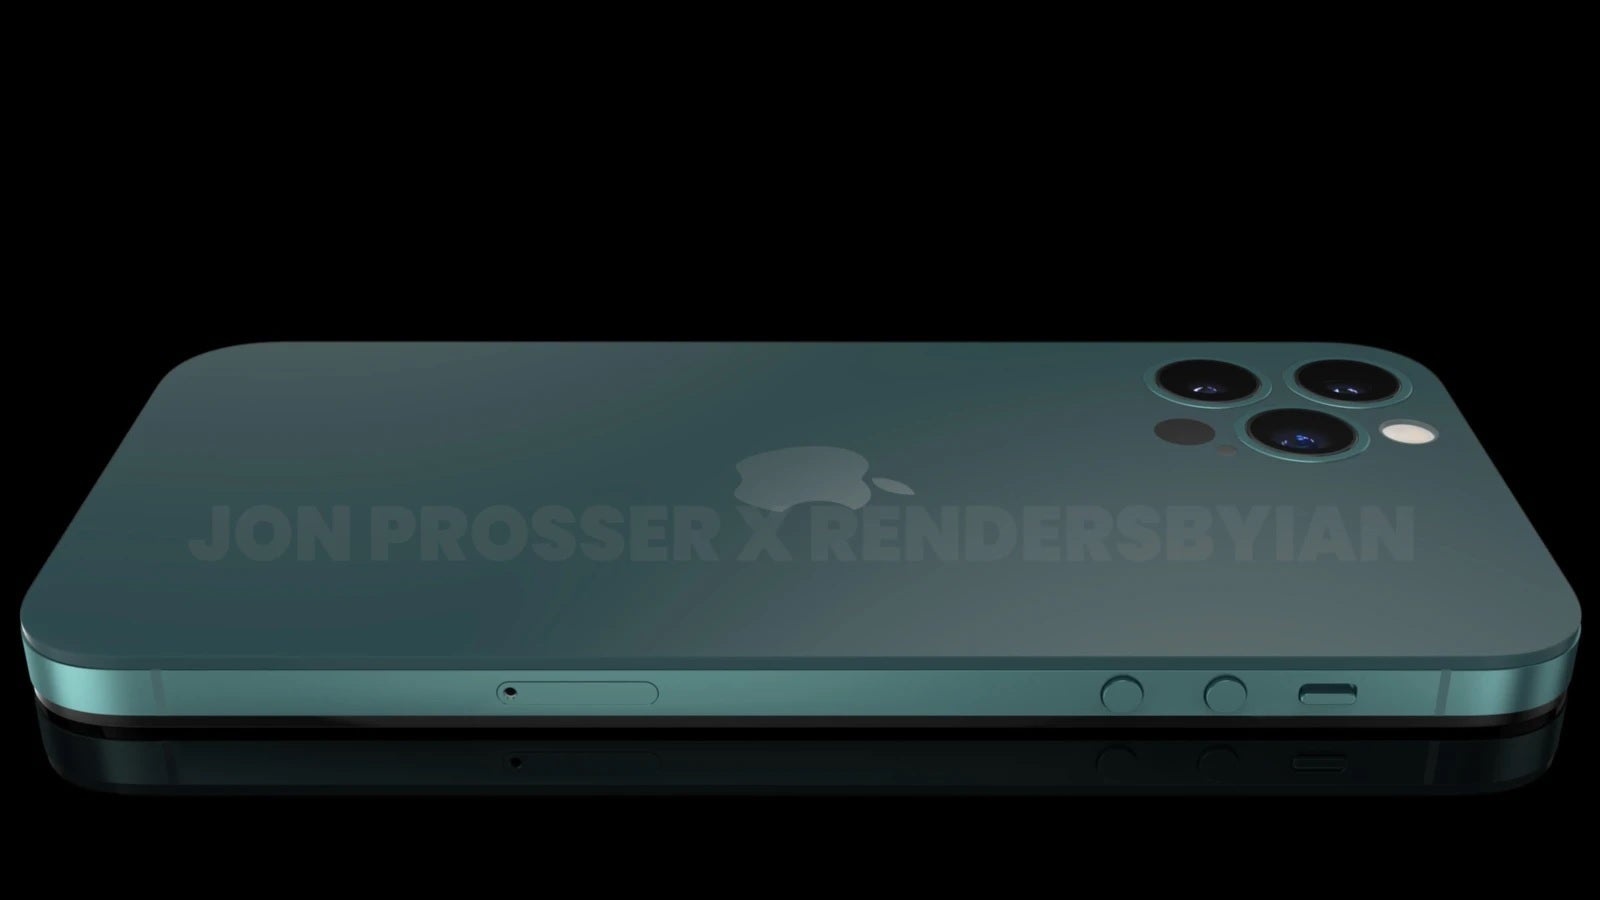 Rendering of the iPhone 15 Ultra - The Apple supplier may have released big news about the design of the iPhone 15 Pro and Ultra